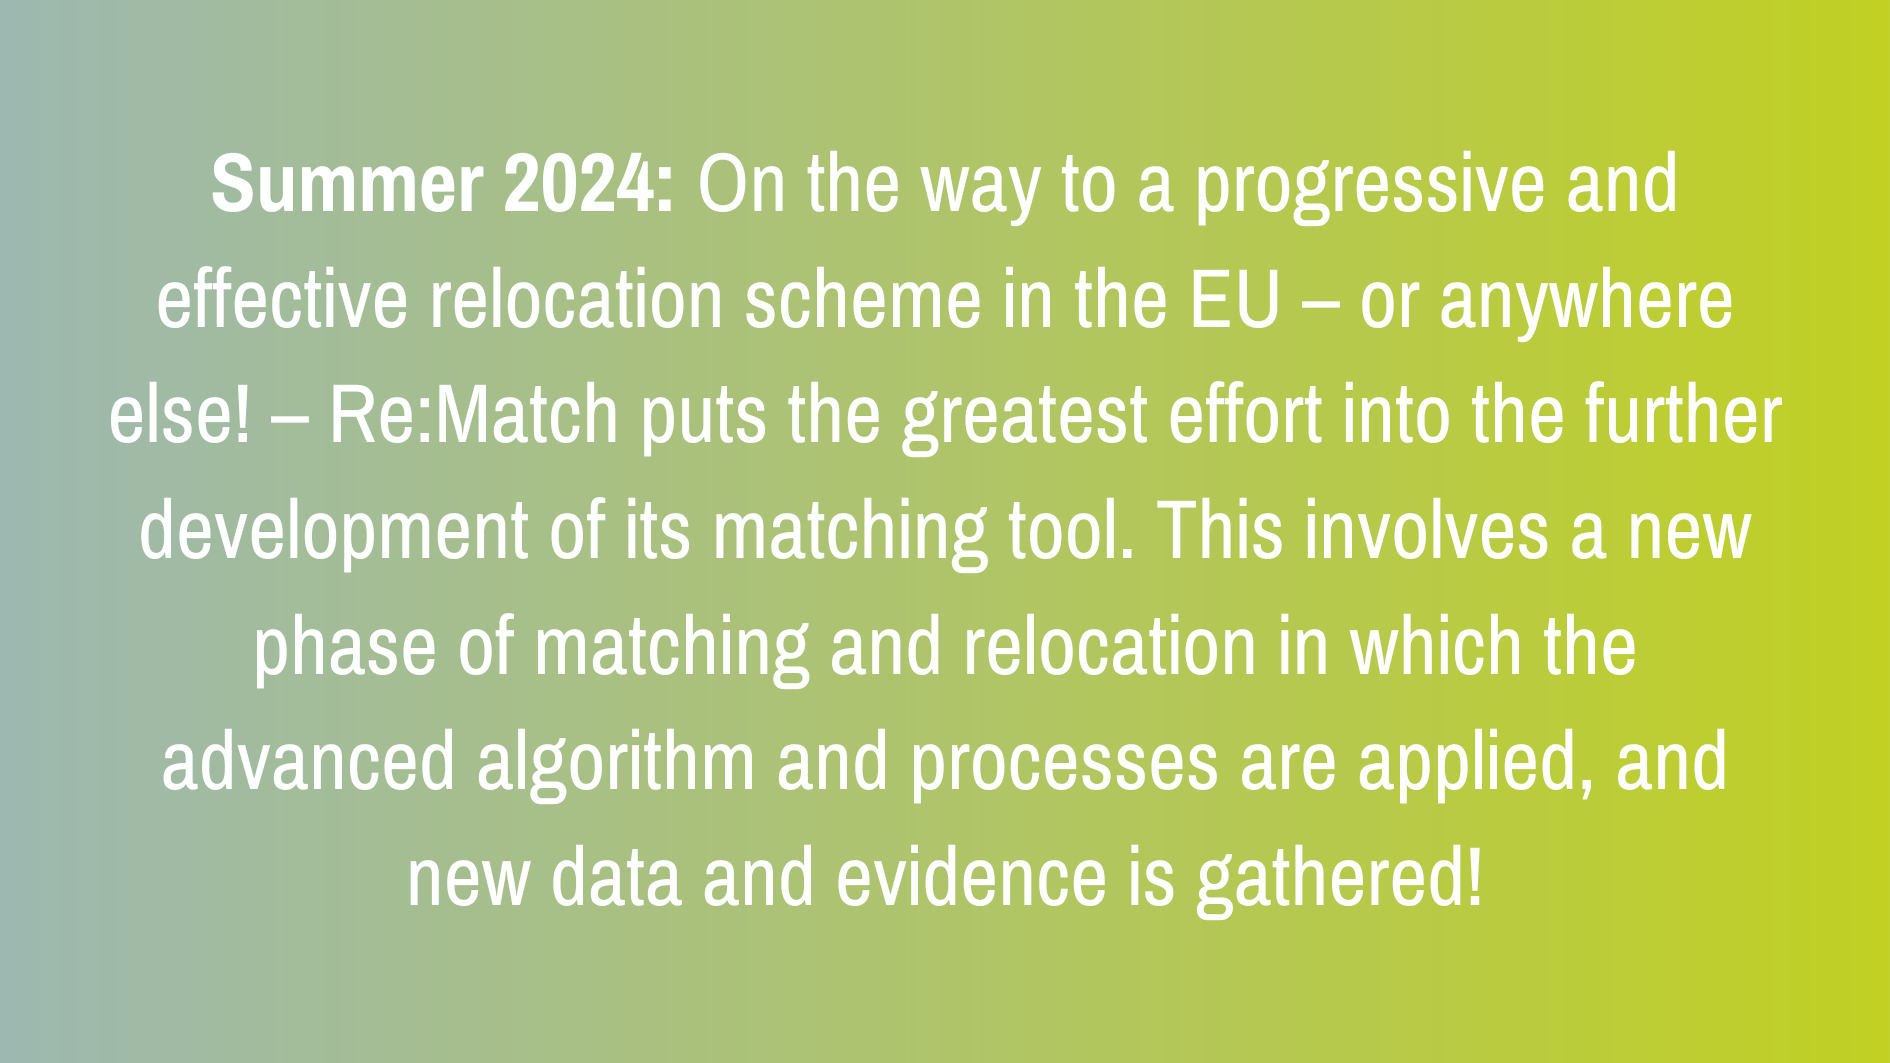 Summer 2024: On the way to a progressive and effective relocation scheme in the EU – or anywhere else! – Re:Match puts the greatest effort into the further development of its matching tool. This involves a new phase of matching and relocation in which the advanced algorithm and processes are applied, and new data and evidence is gathered!